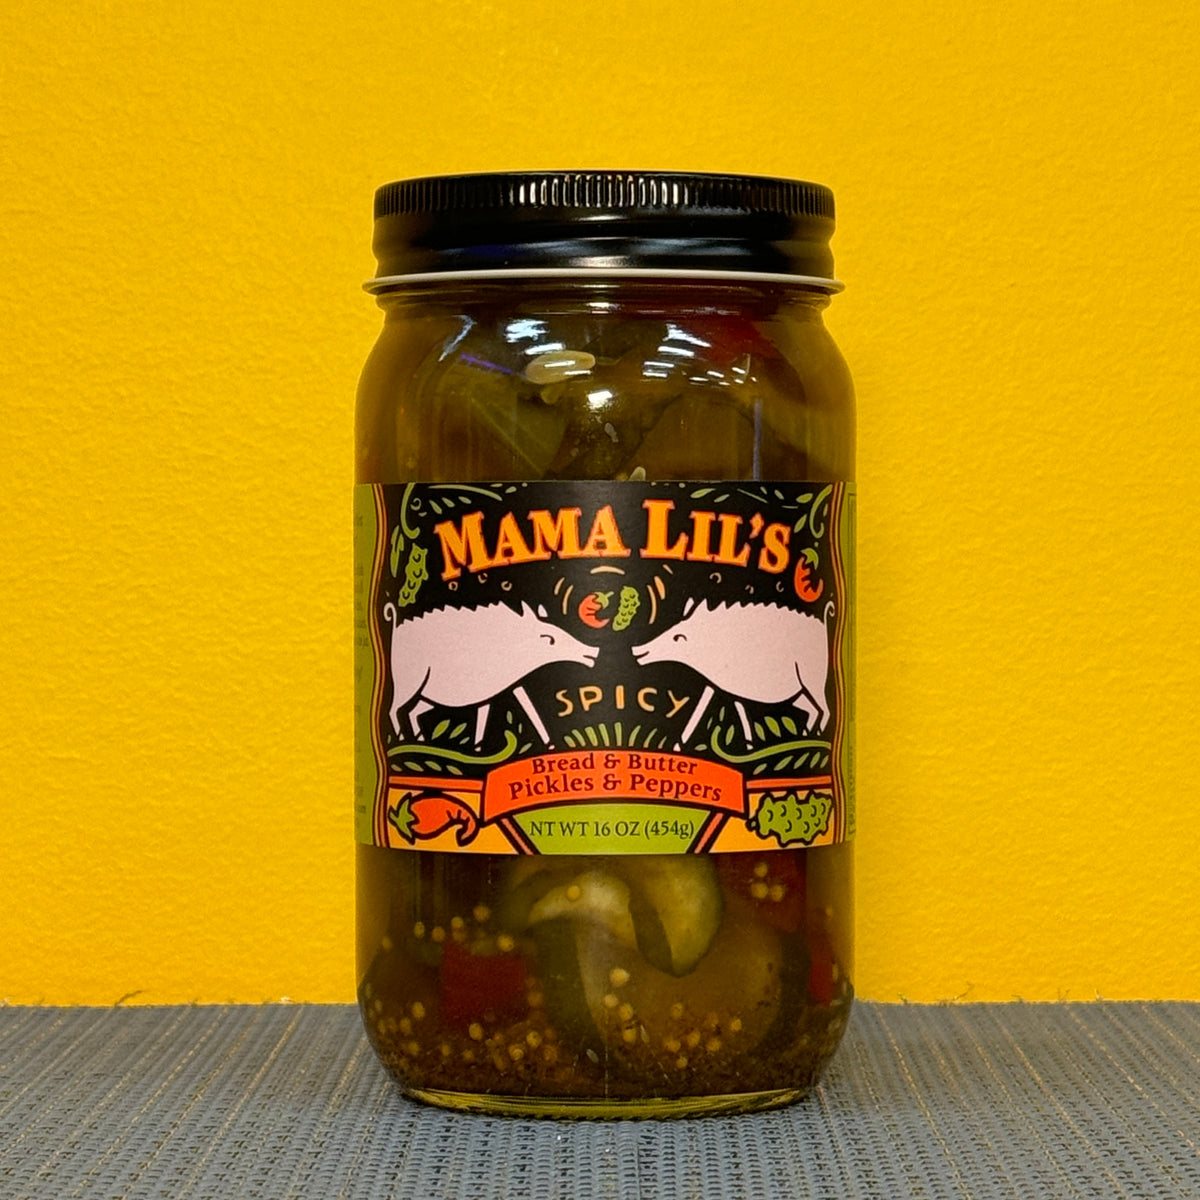 Mama Lil's Bread & Butter Pickles and Peppers 16 oz